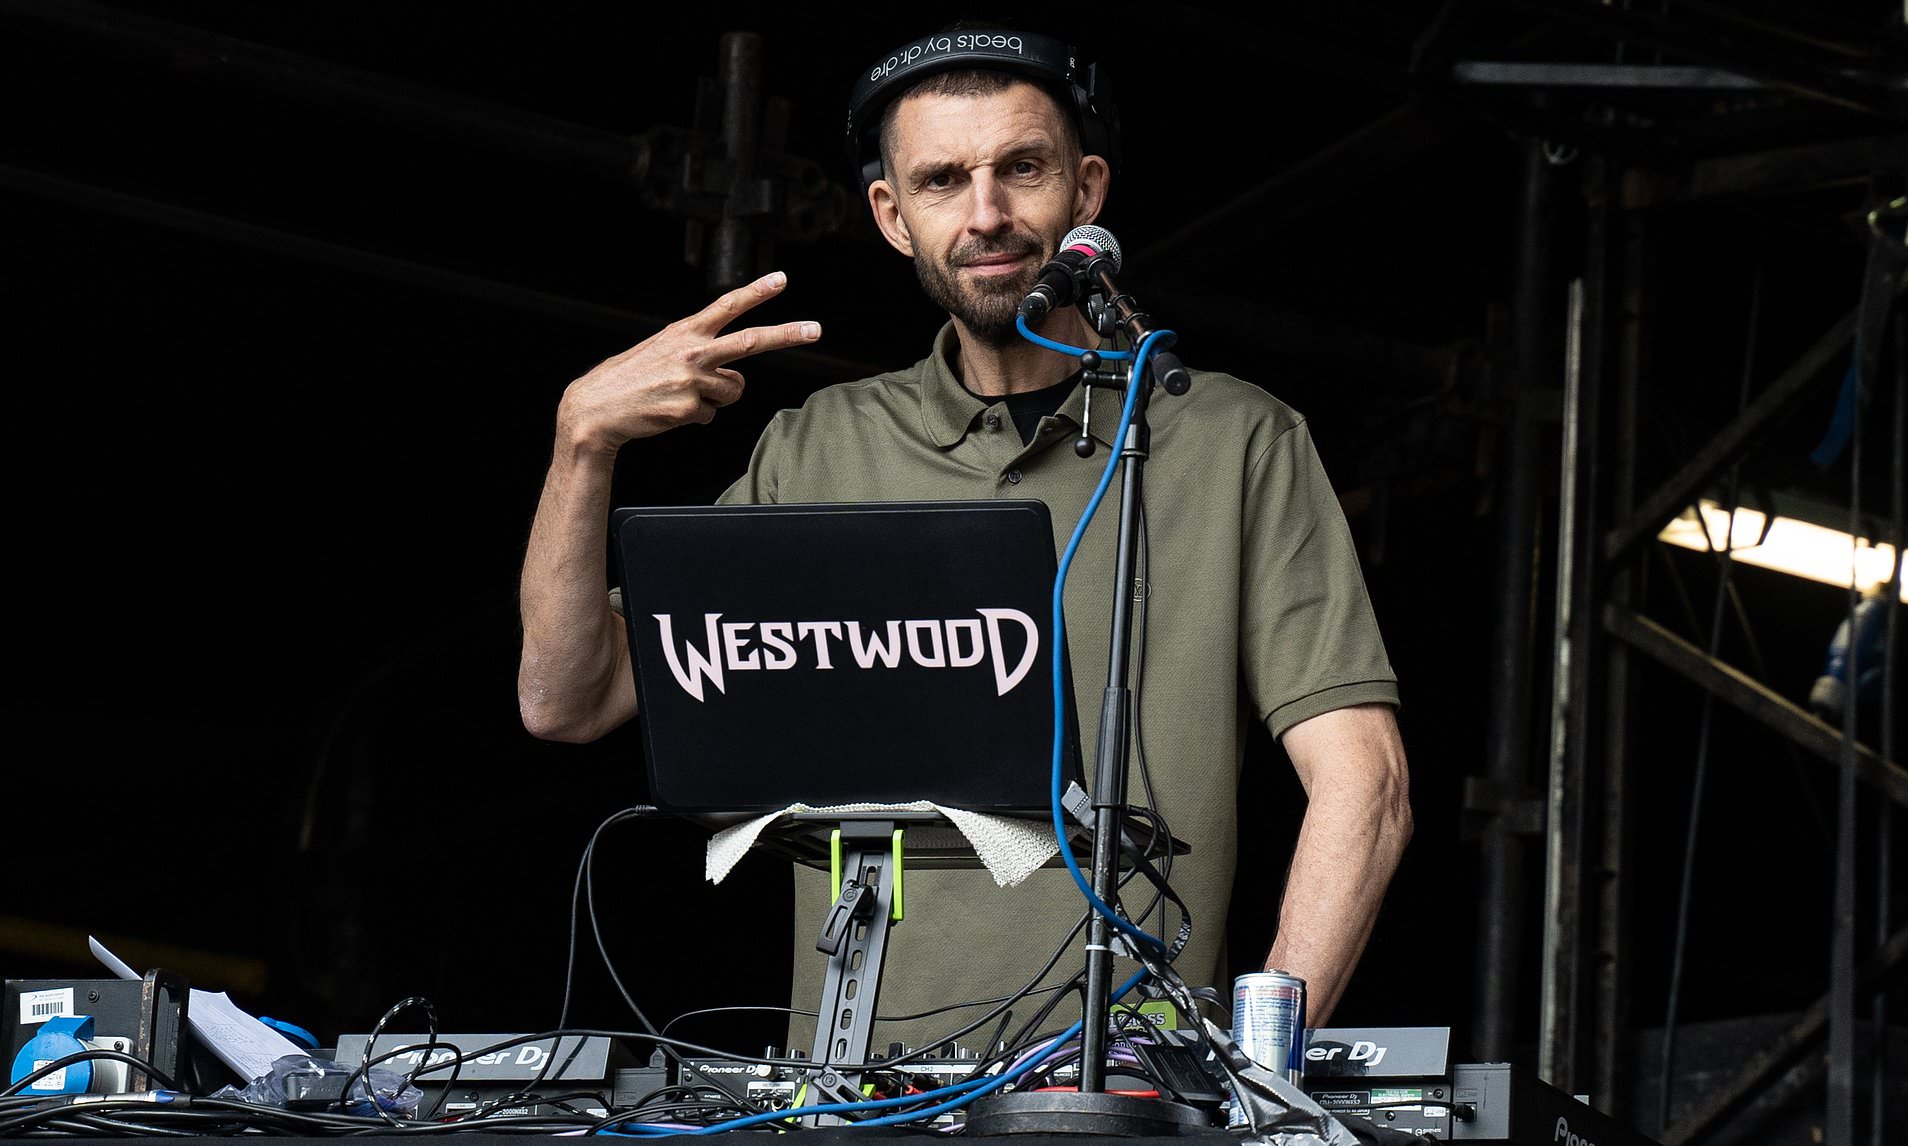 DJ Tim Westwood was accused of sexual abuse by multiple women in a BBC, Guardian exposé